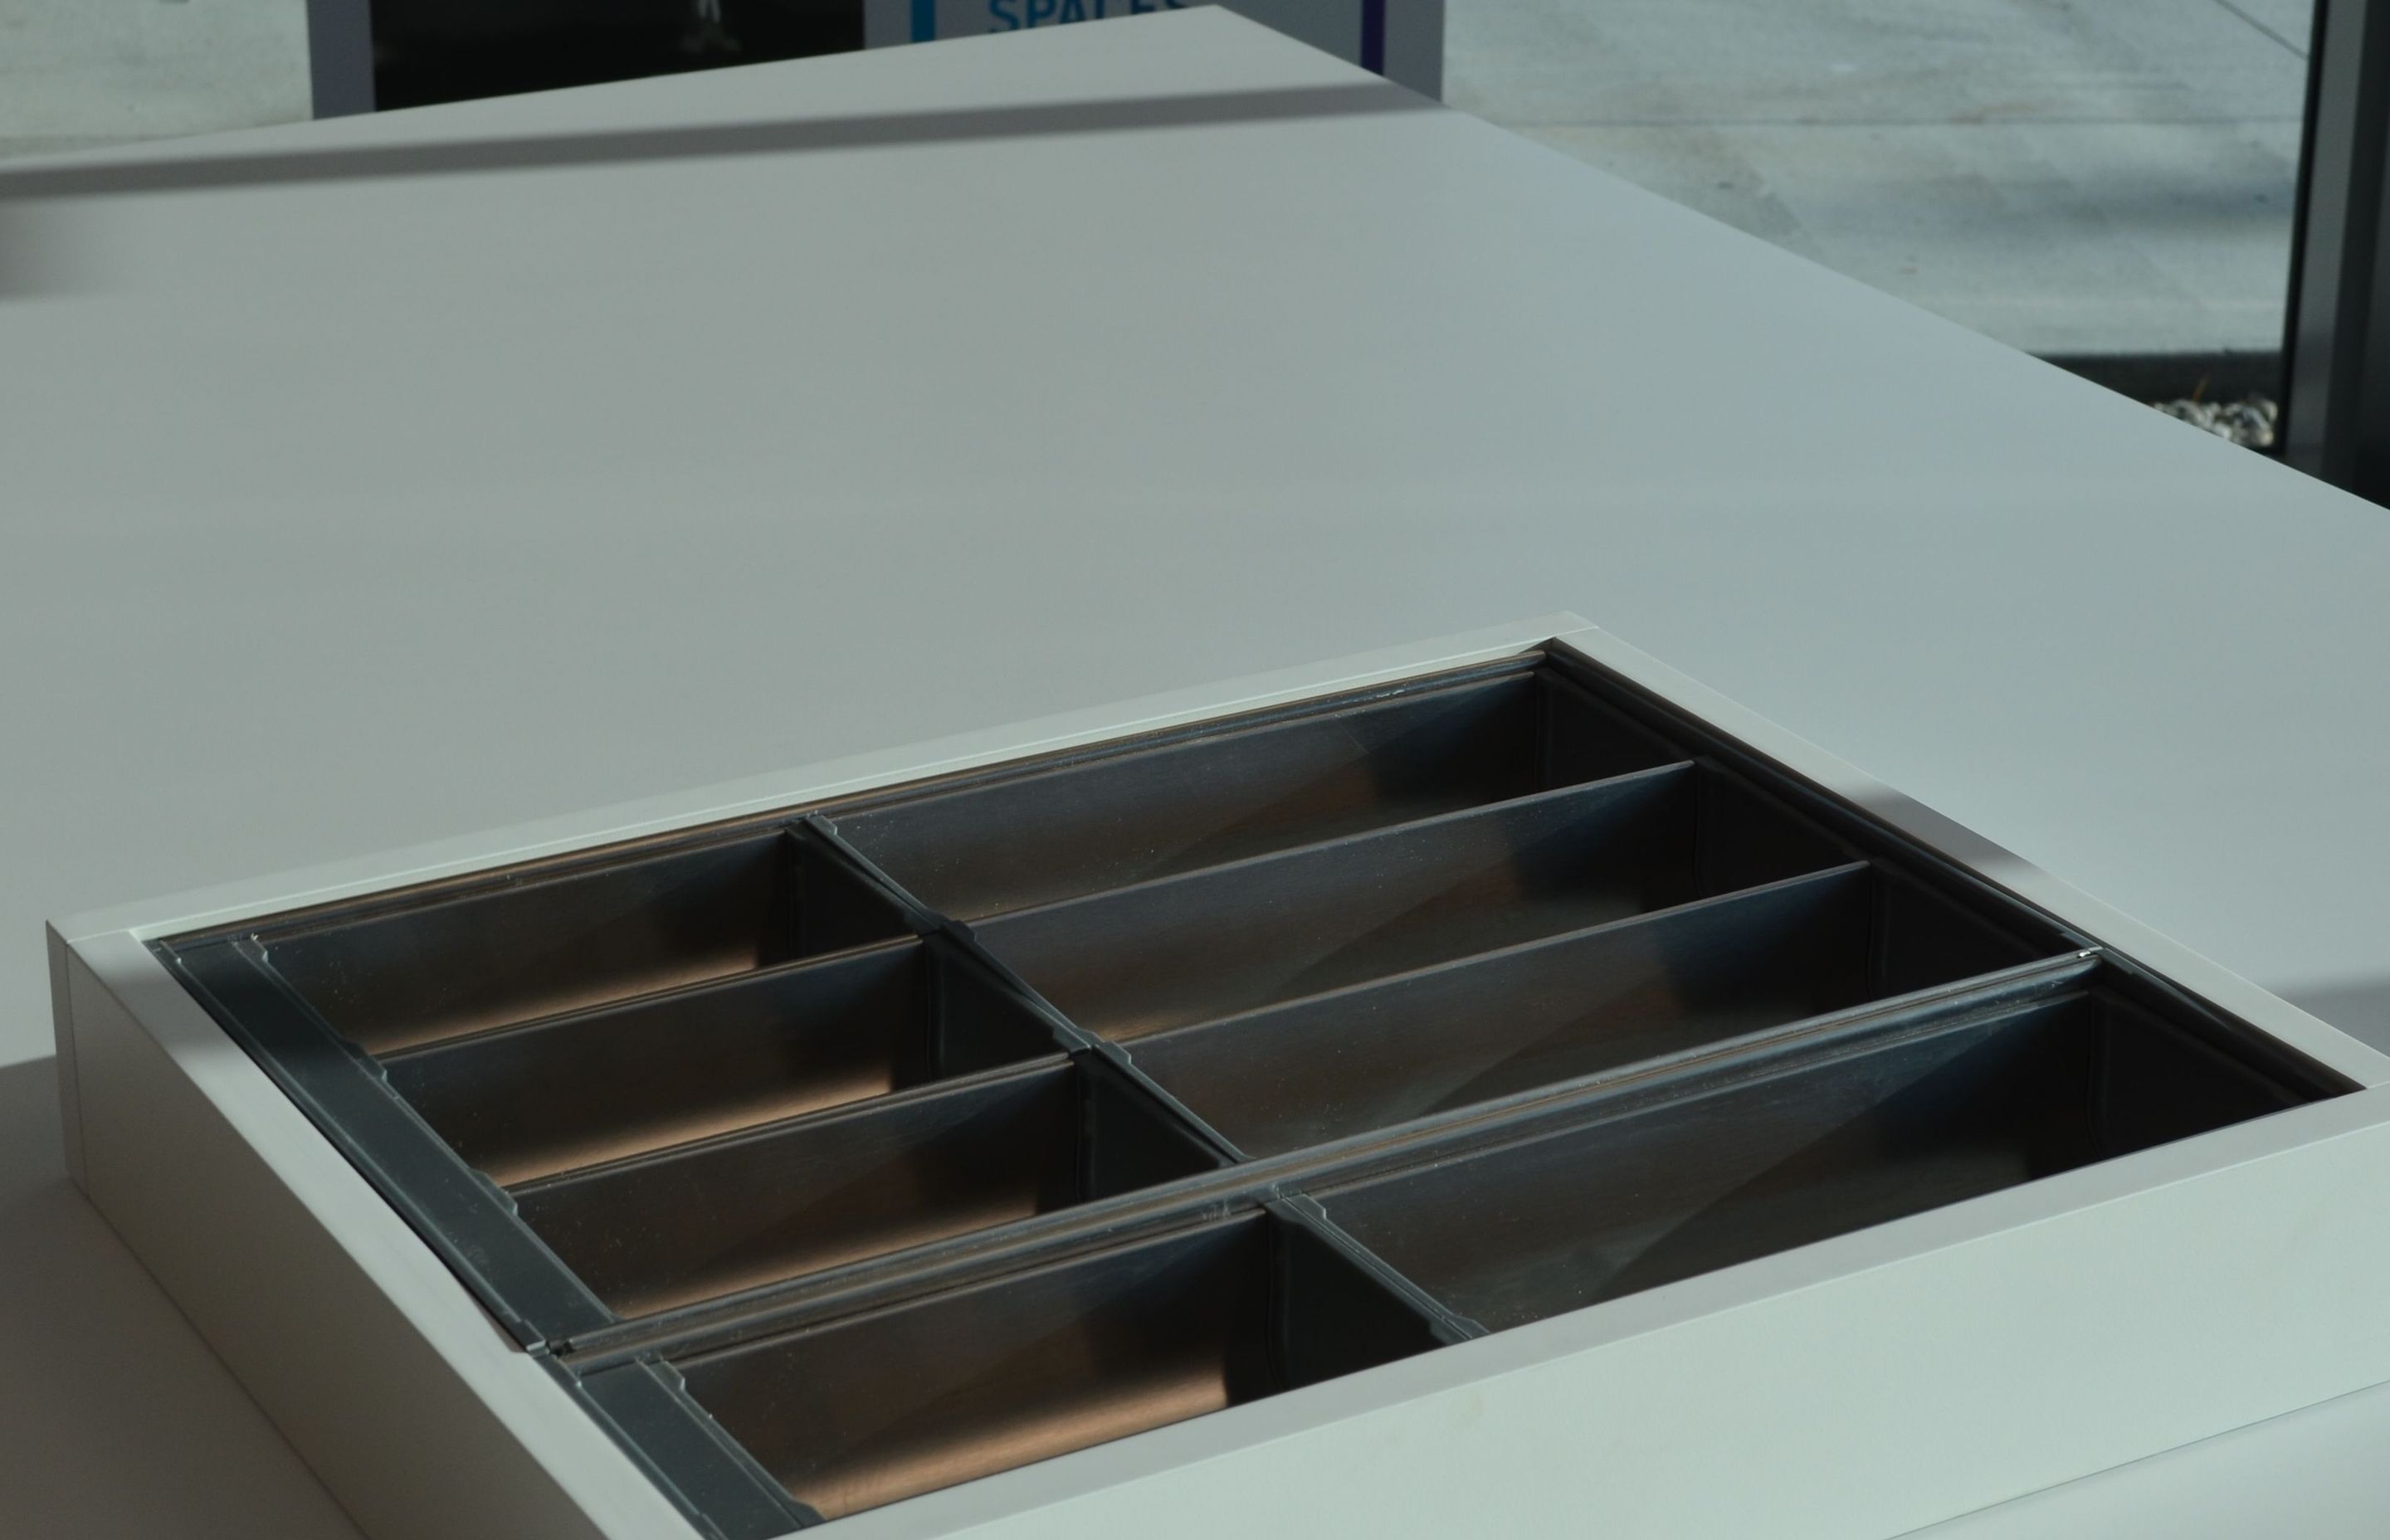 Fit Showroom Christchurch - Inoxa Cutlery Organisers - 'Have A Play' Box